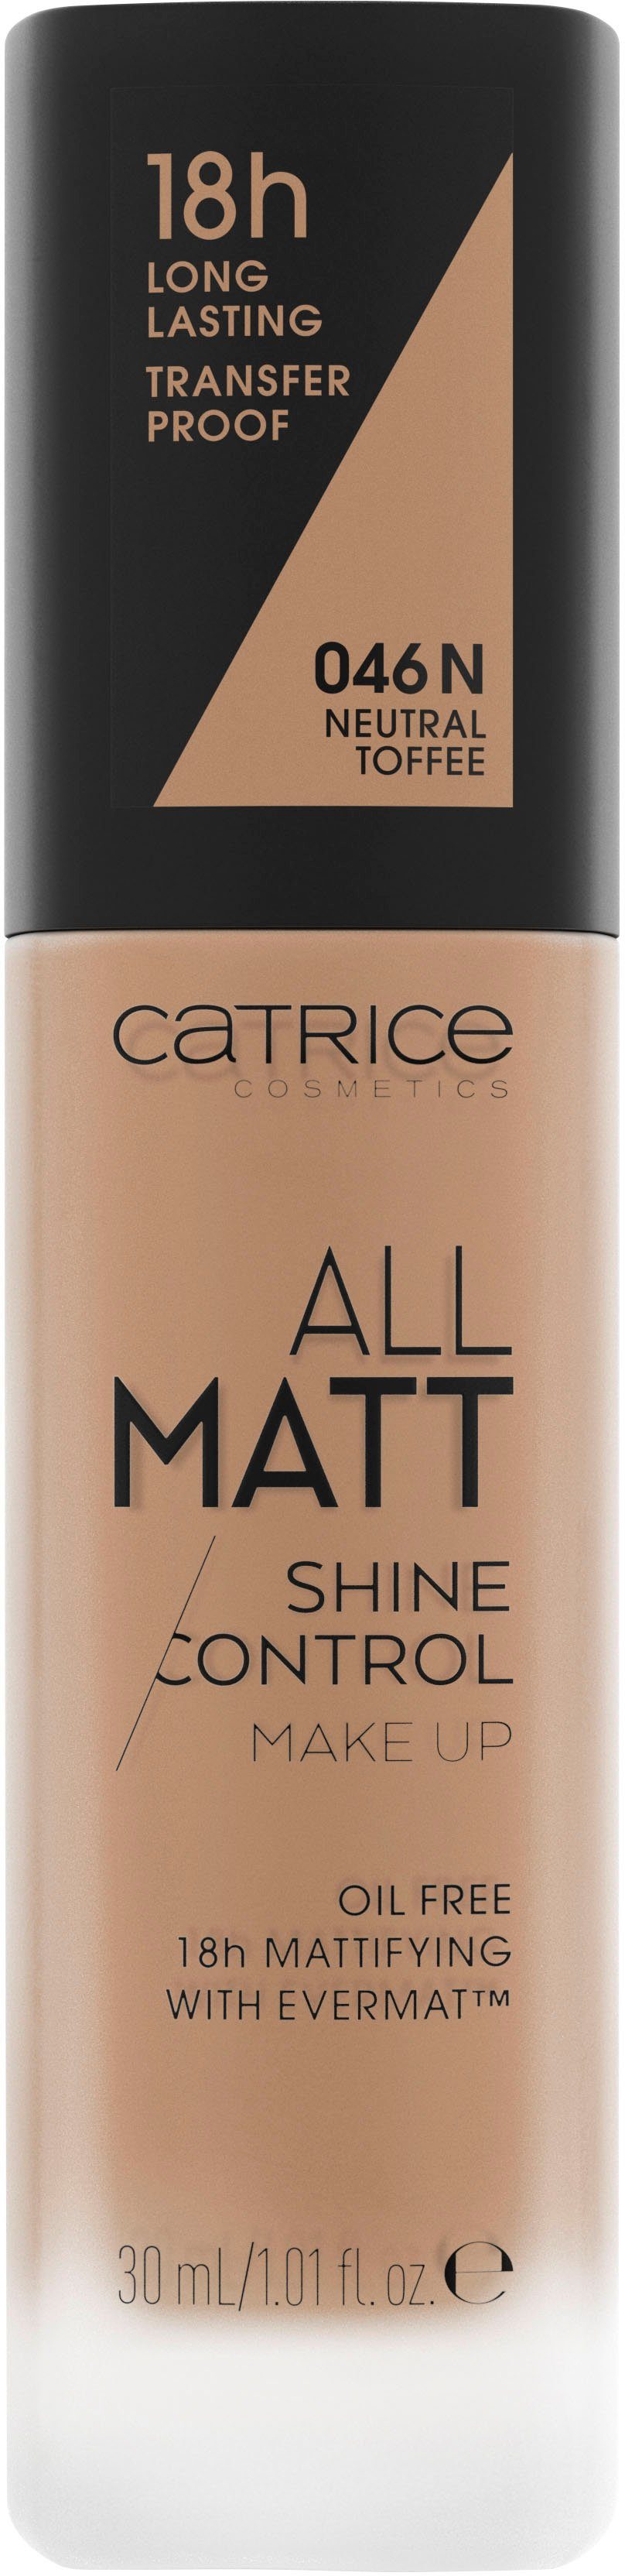 Catrice Foundation All Up Toffee Shine Matt Control Make Neutral